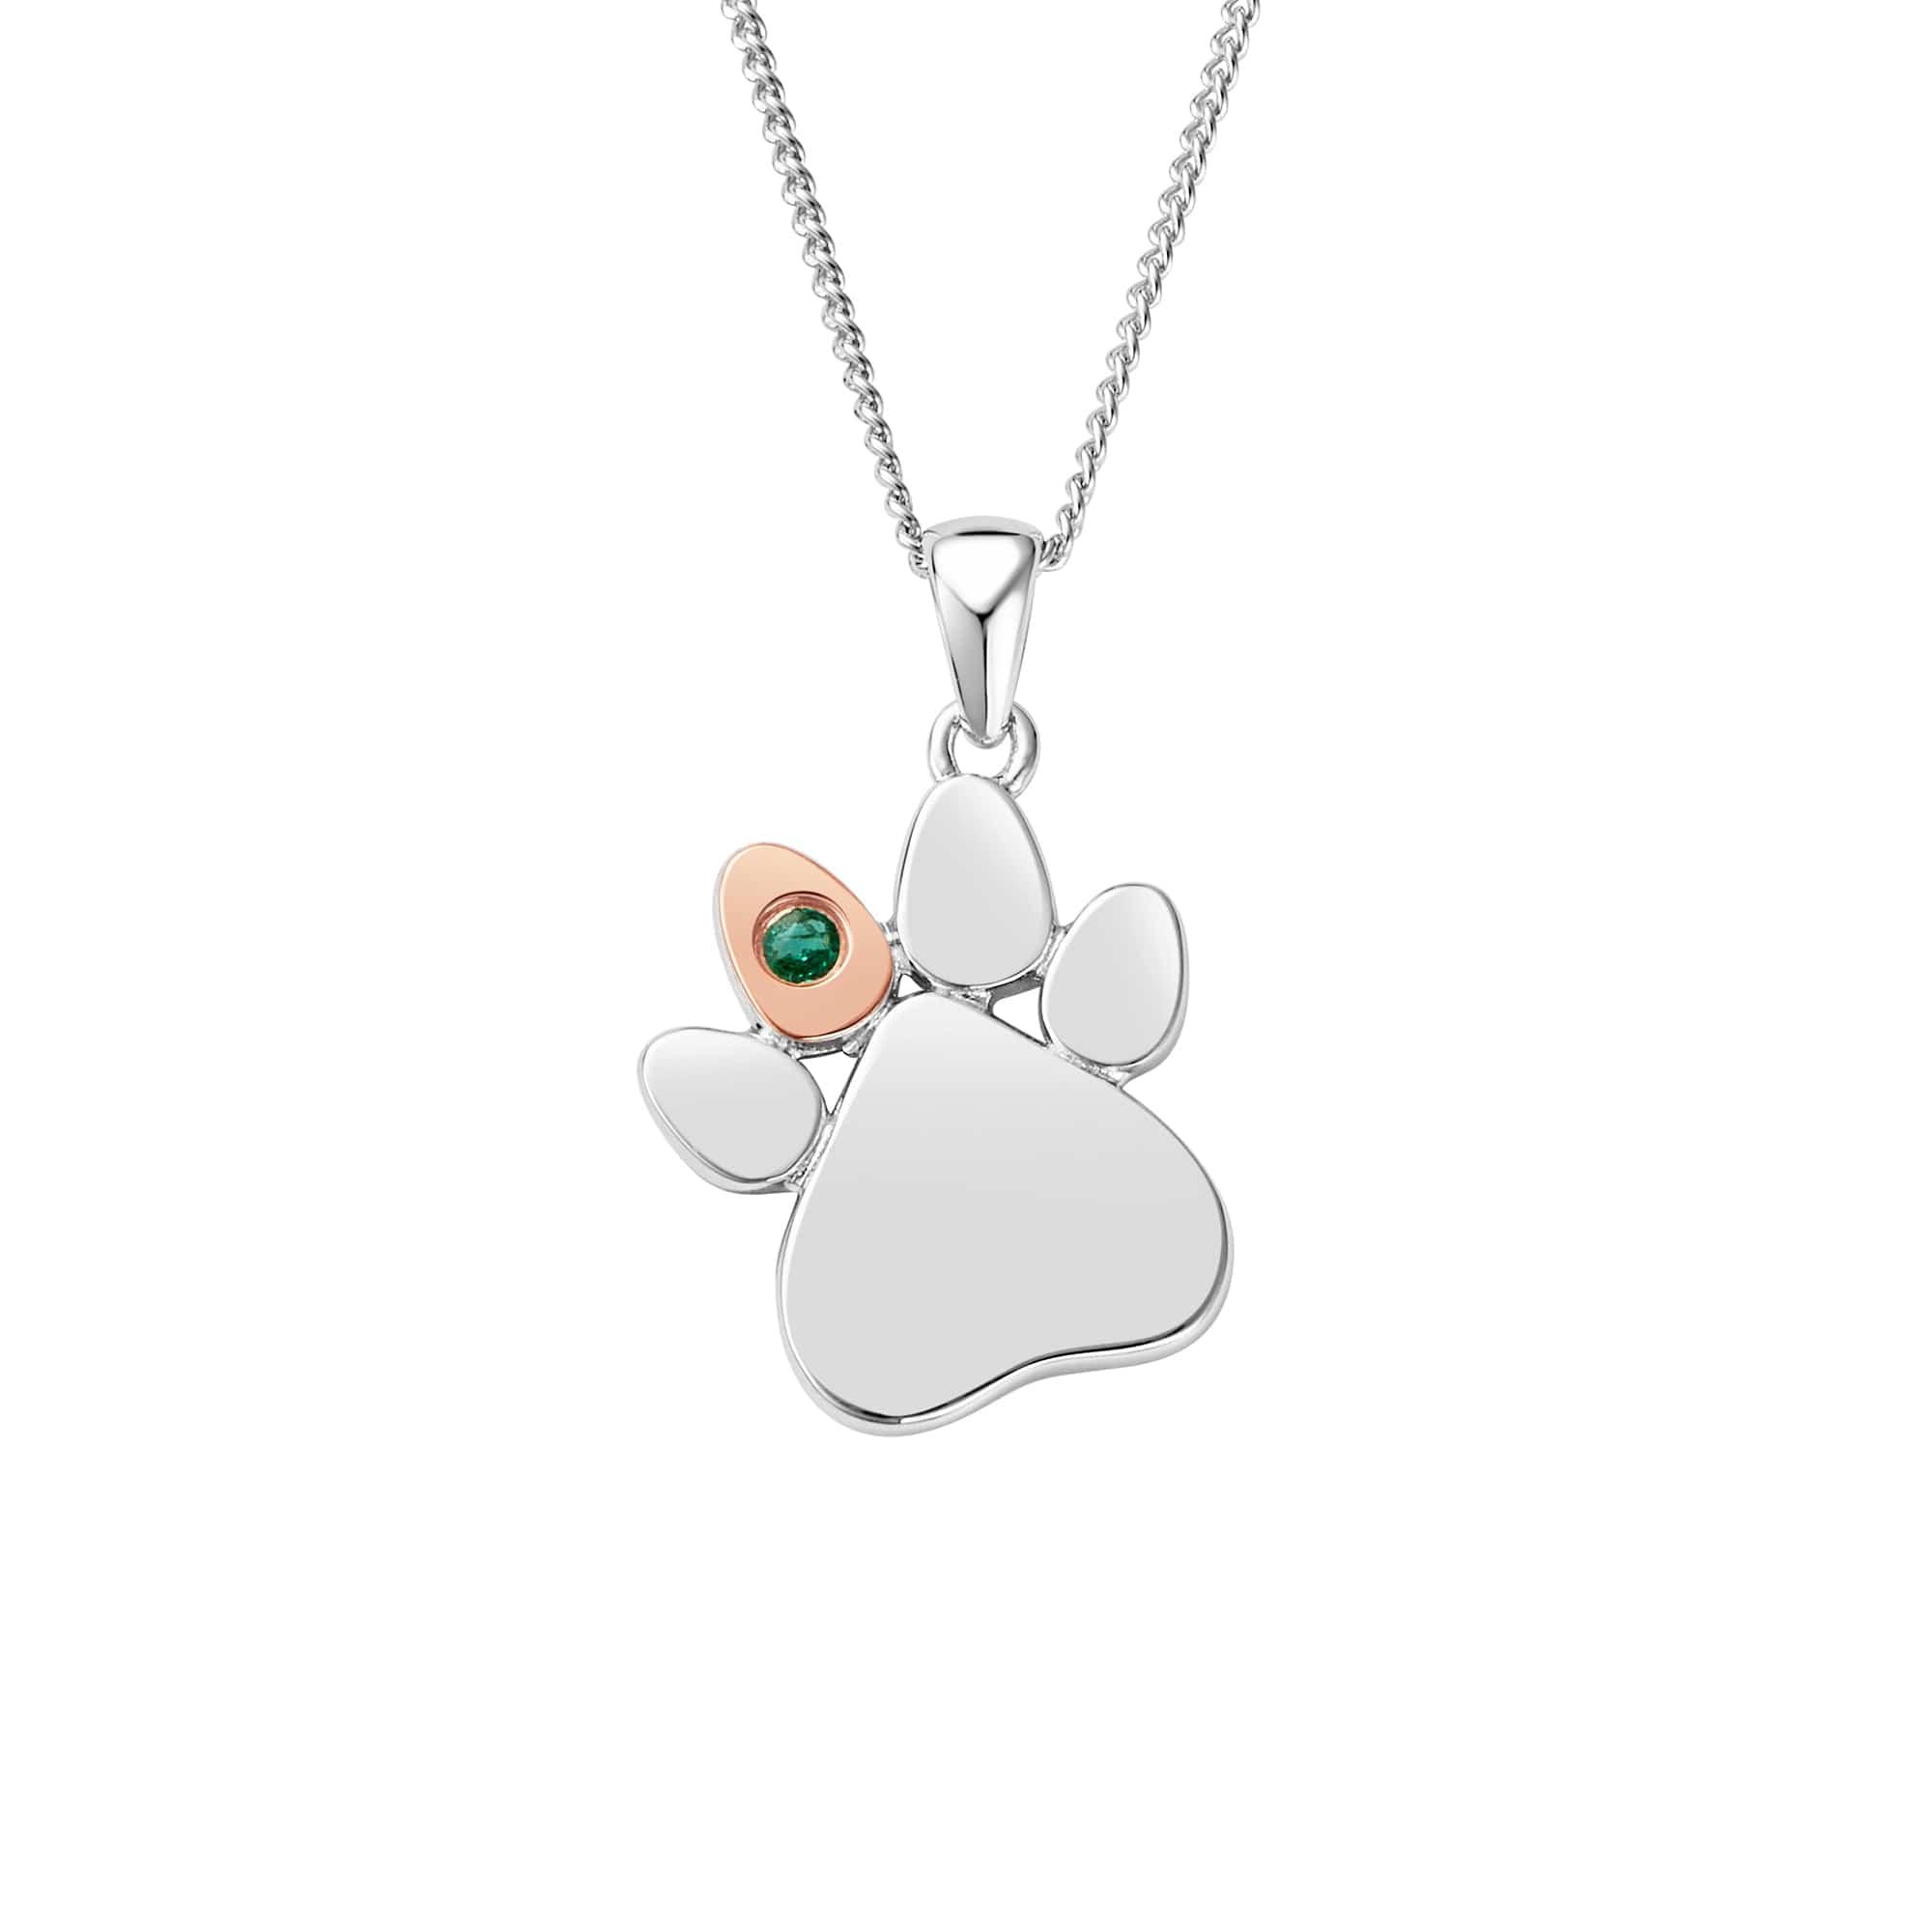 Sterling silver paw print necklace, custom made by Ron Emanuel -  thegoldsmith